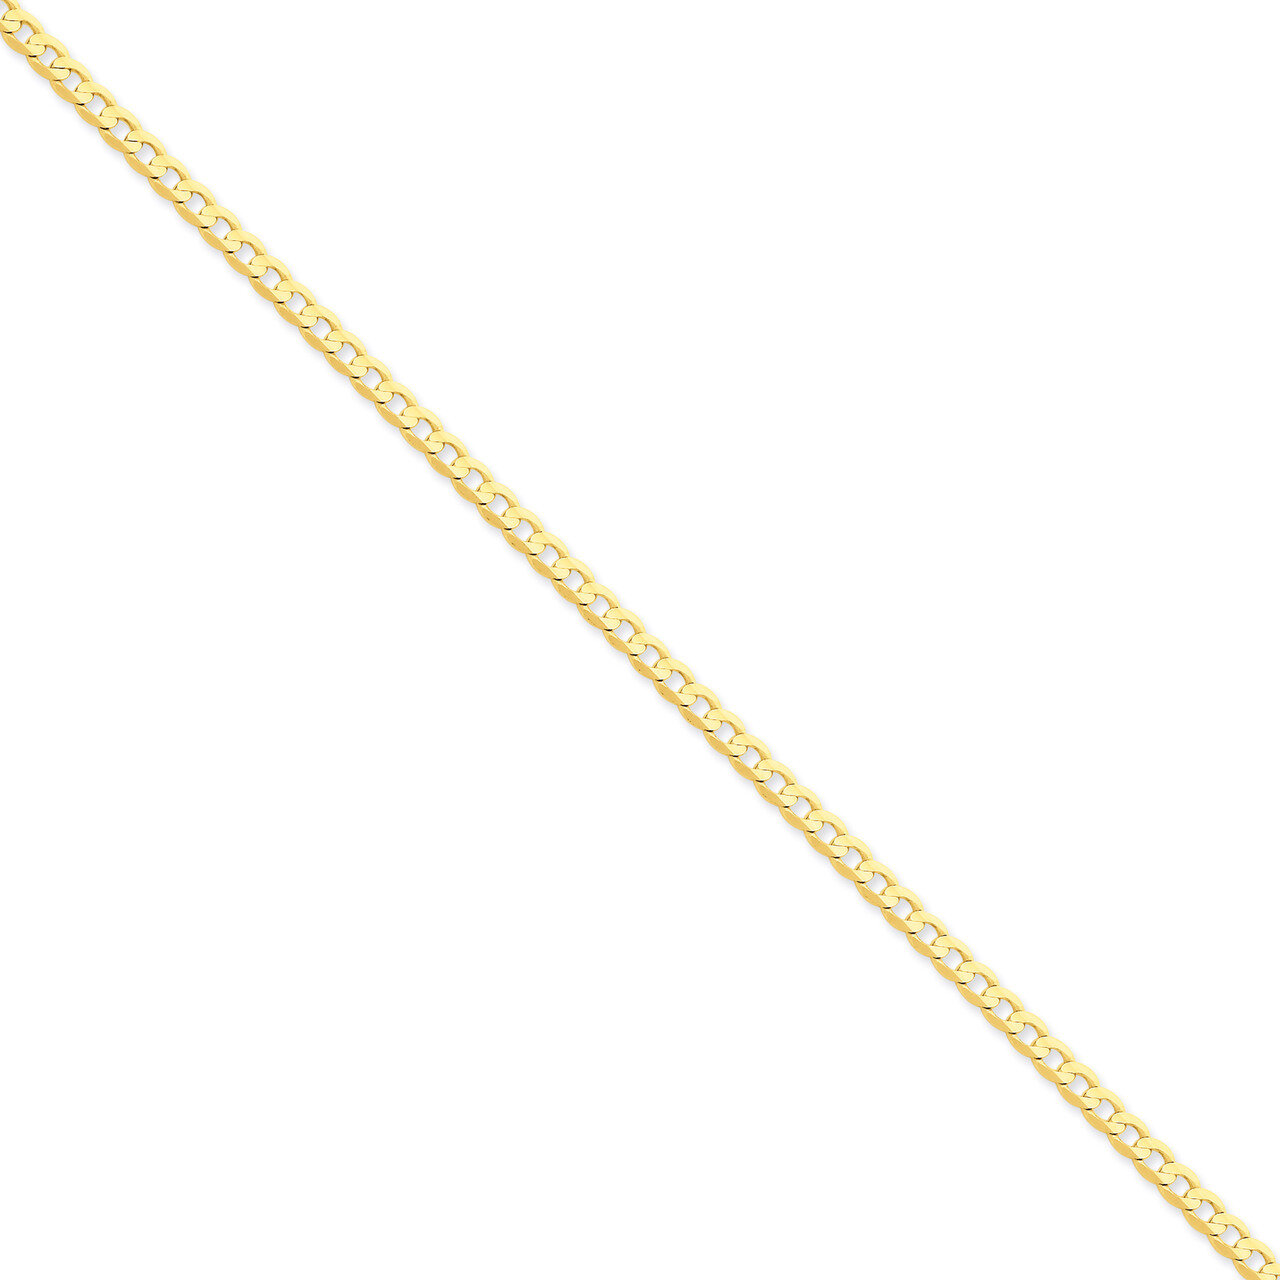 3.8mm Concave Curb Chain 8 Inch 14k Gold LCR100-8